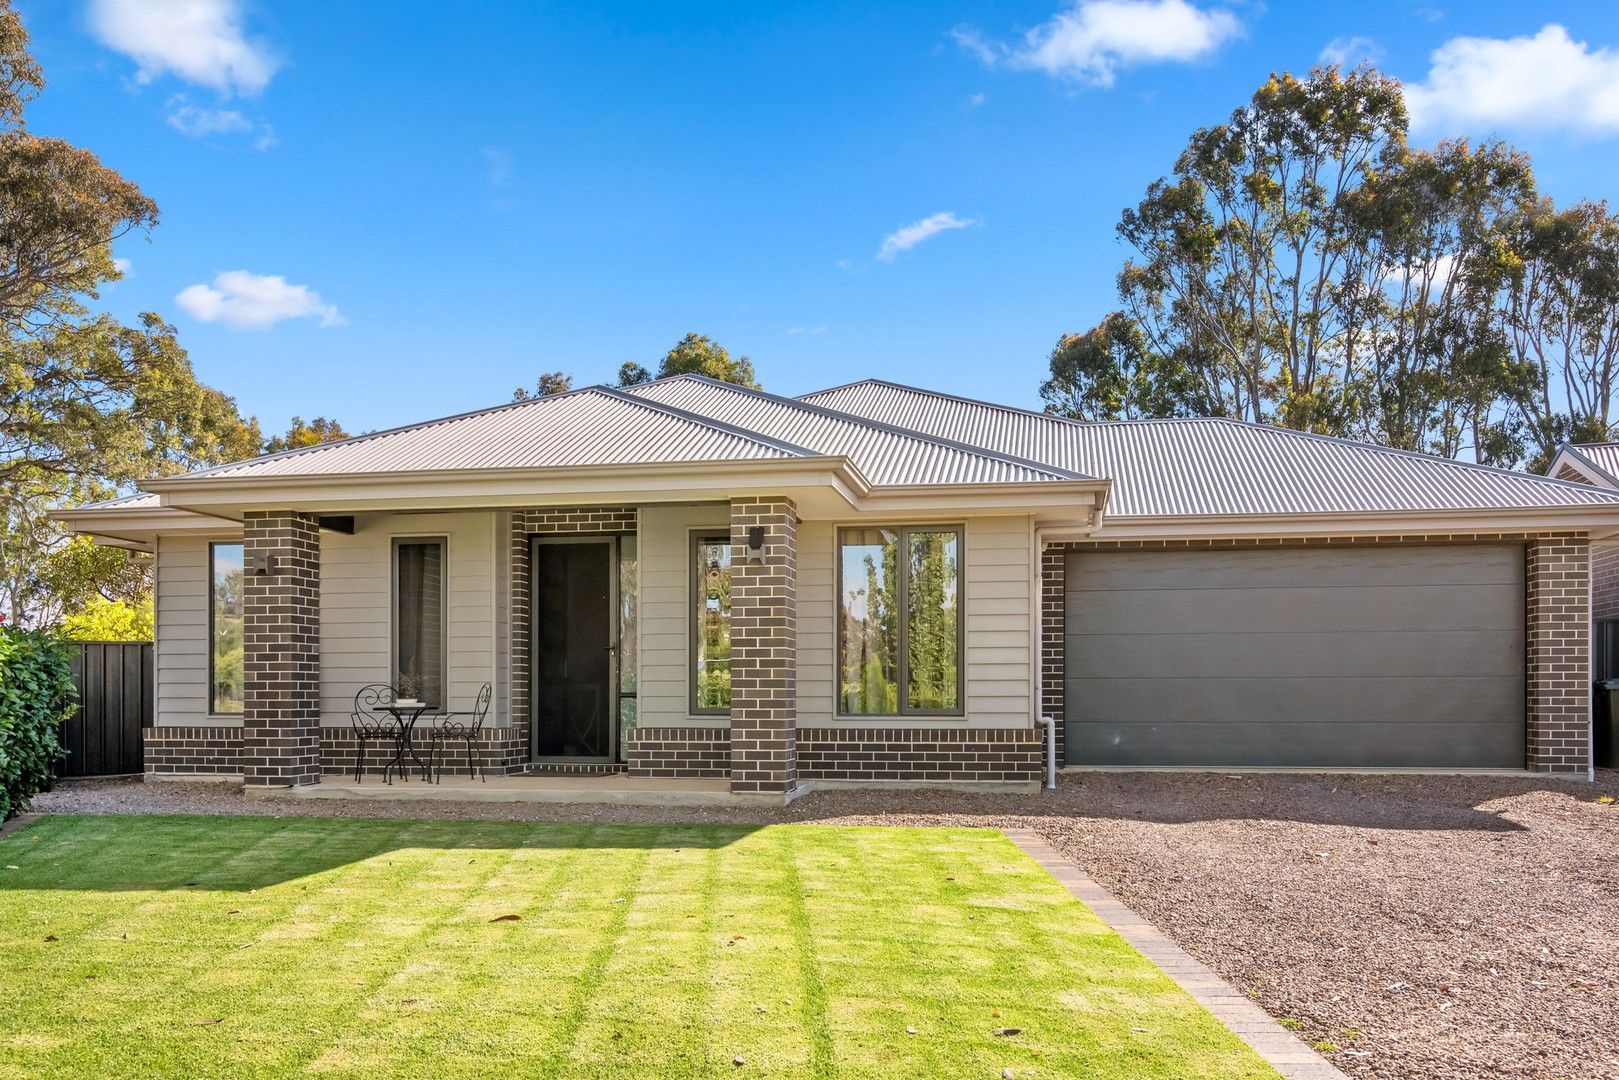 4 bedrooms House in 30 Kennebec Court MOUNT BARKER SA, 5251